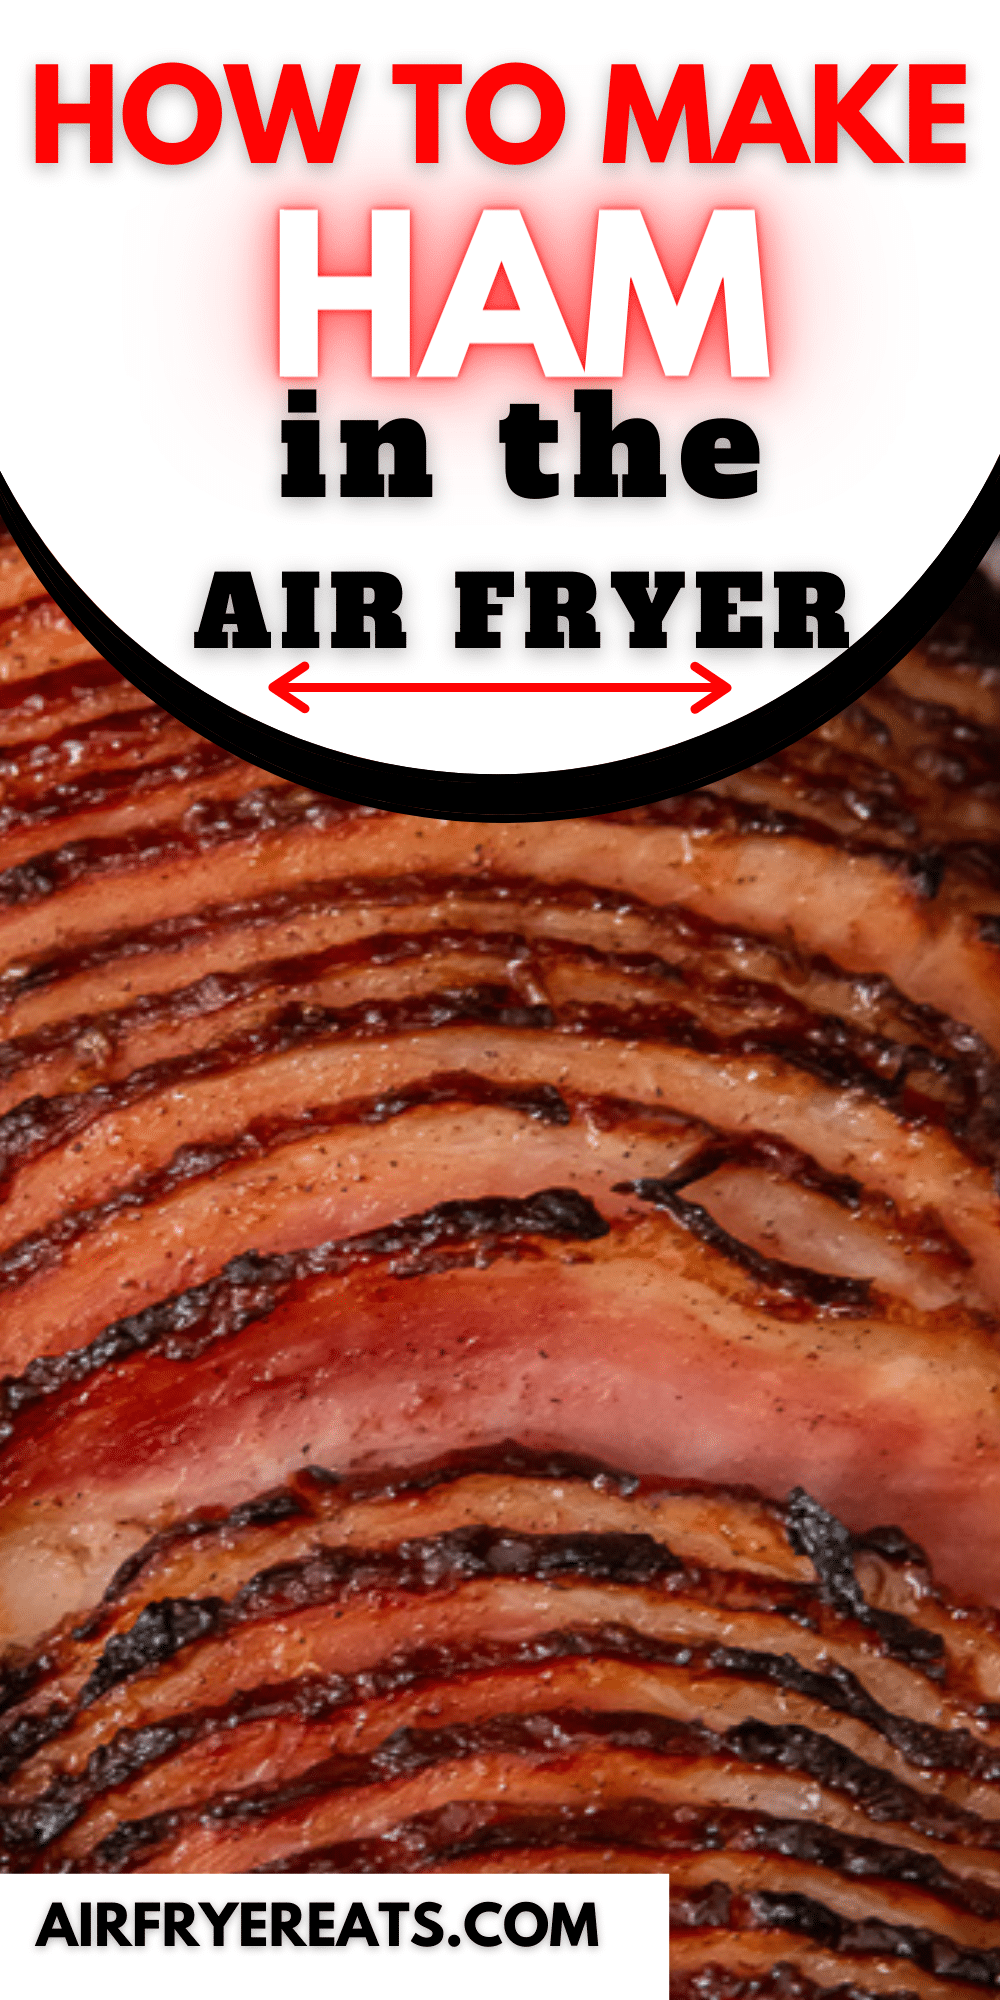 Air Fryer Ham is a time saving way to cook a ham for a holiday dinner or weekend meal. A homemade maple glaze makes this air fryer ham recipe the best you'll find. #airfryerham #holidayham via @vegetarianmamma